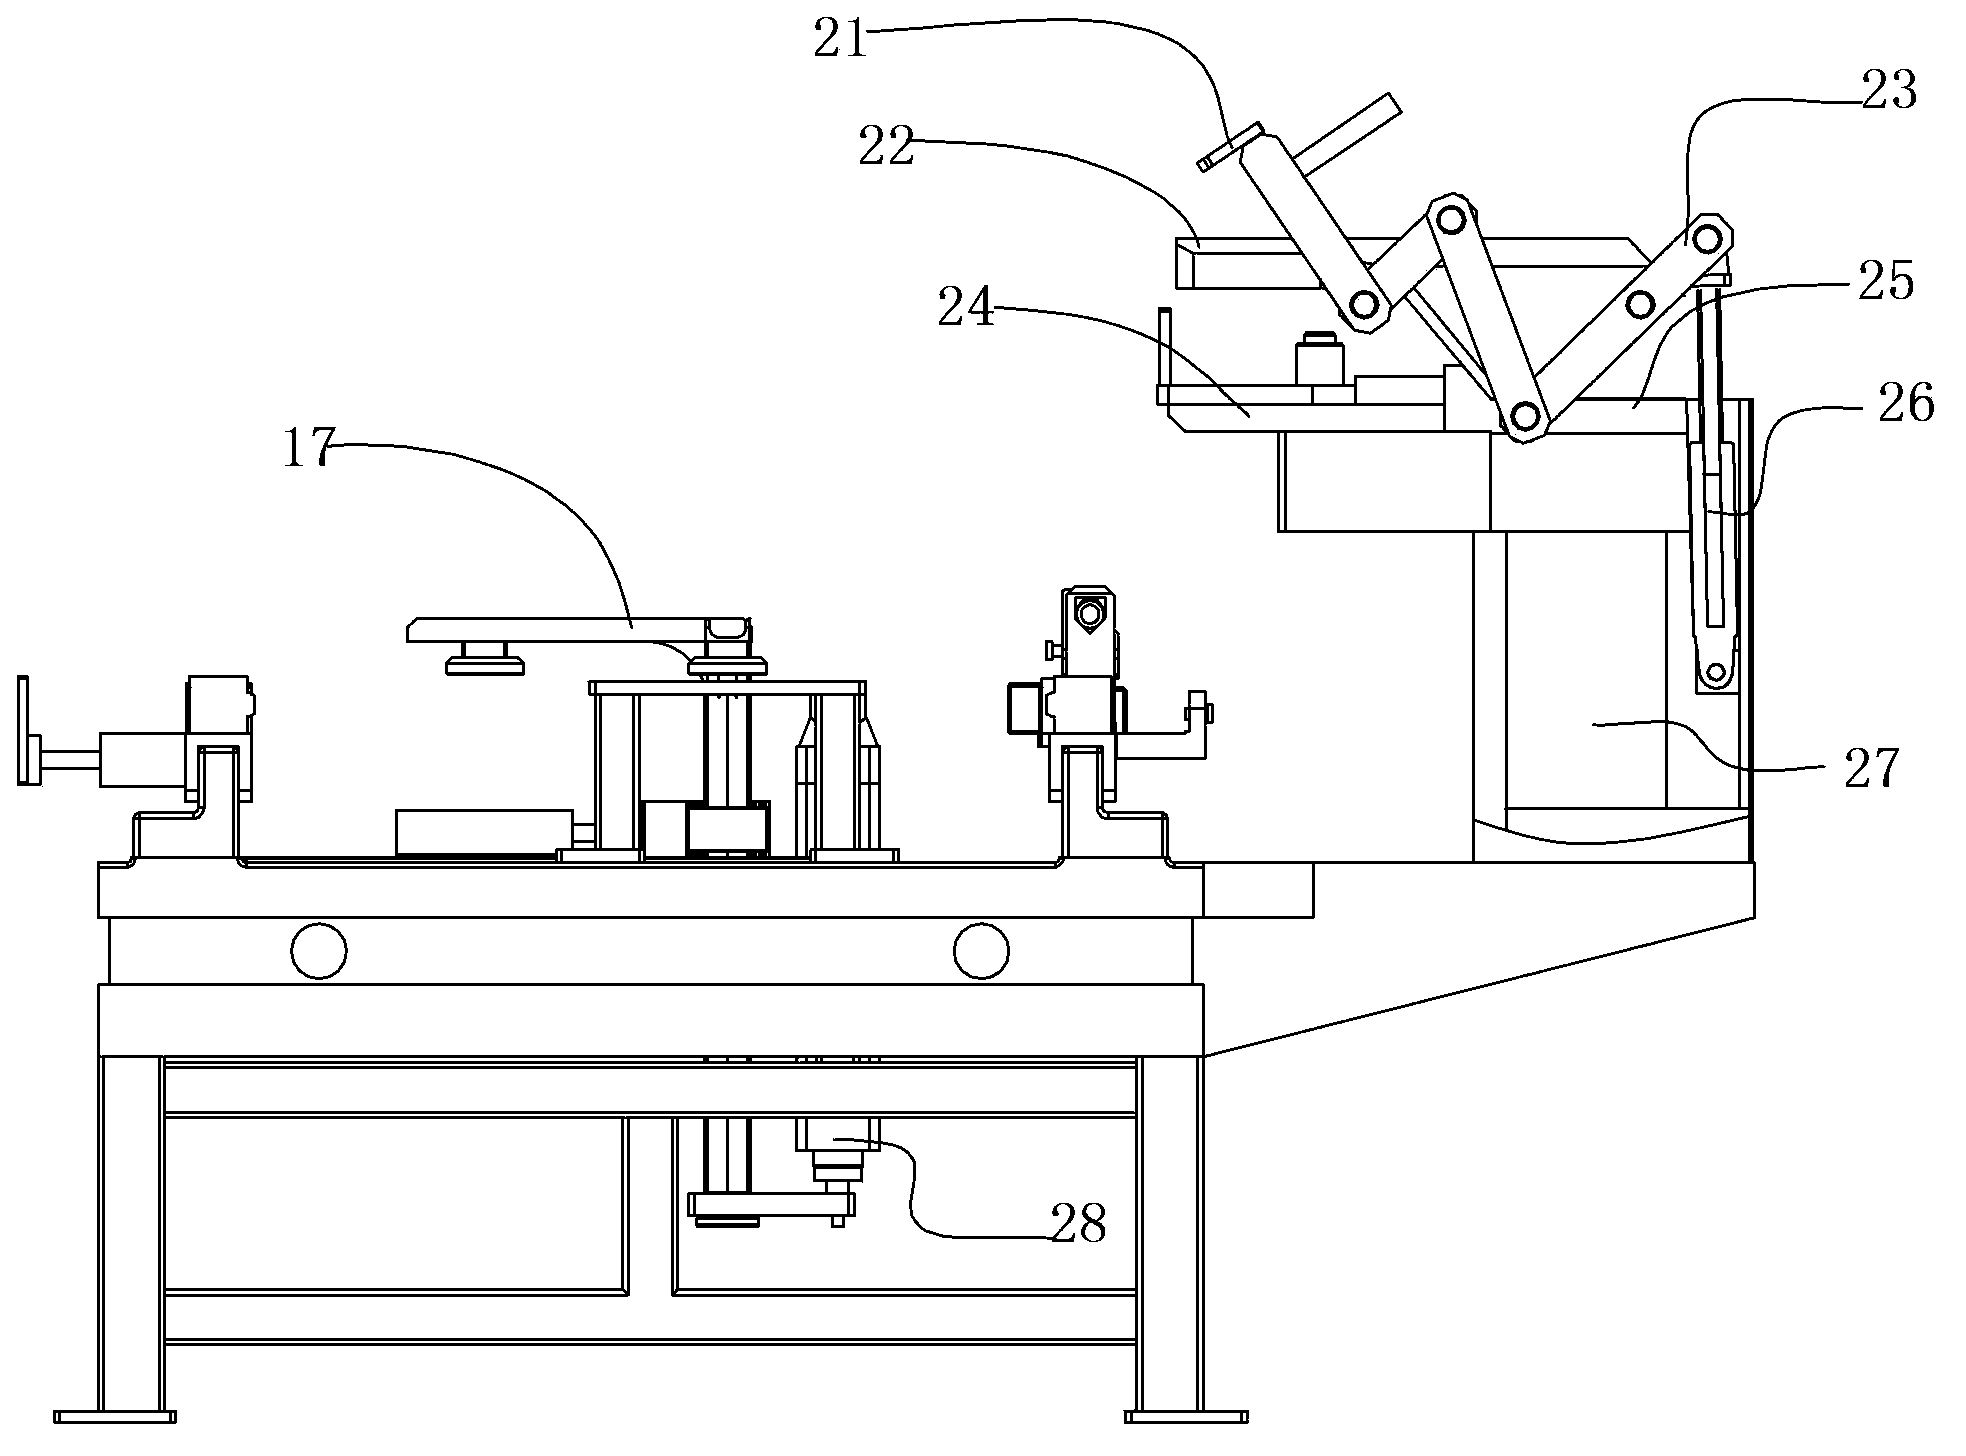 Manual tray carriage welding device